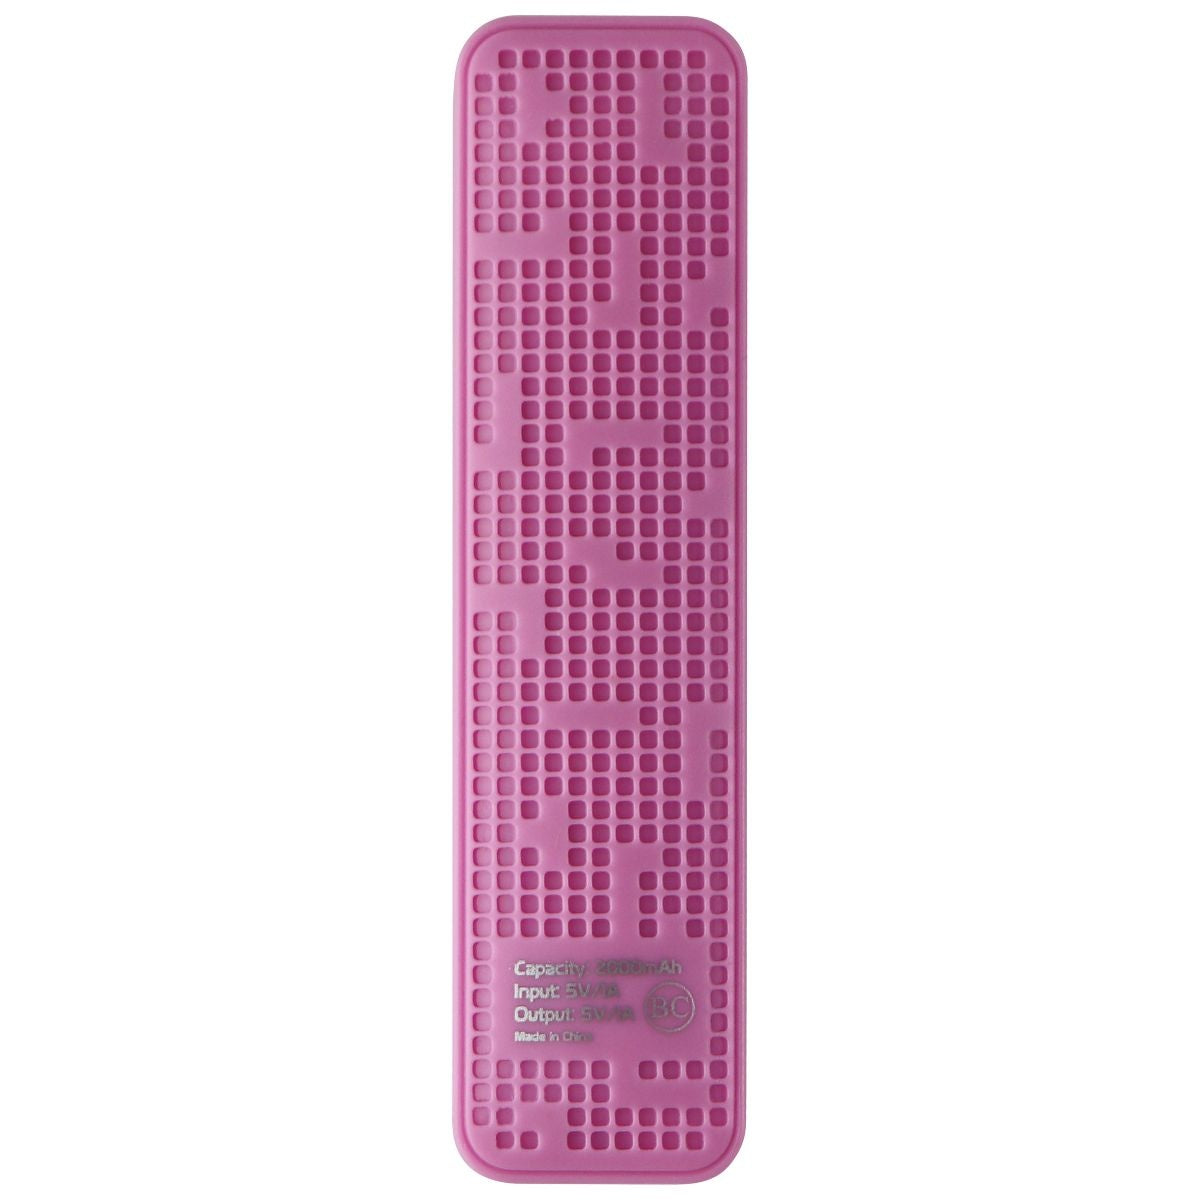 Cellet 2,000mAh Ready to Use USB Power Bank with Micro-USB Cable - Pink Cell Phone - Chargers & Cradles Cellet    - Simple Cell Bulk Wholesale Pricing - USA Seller